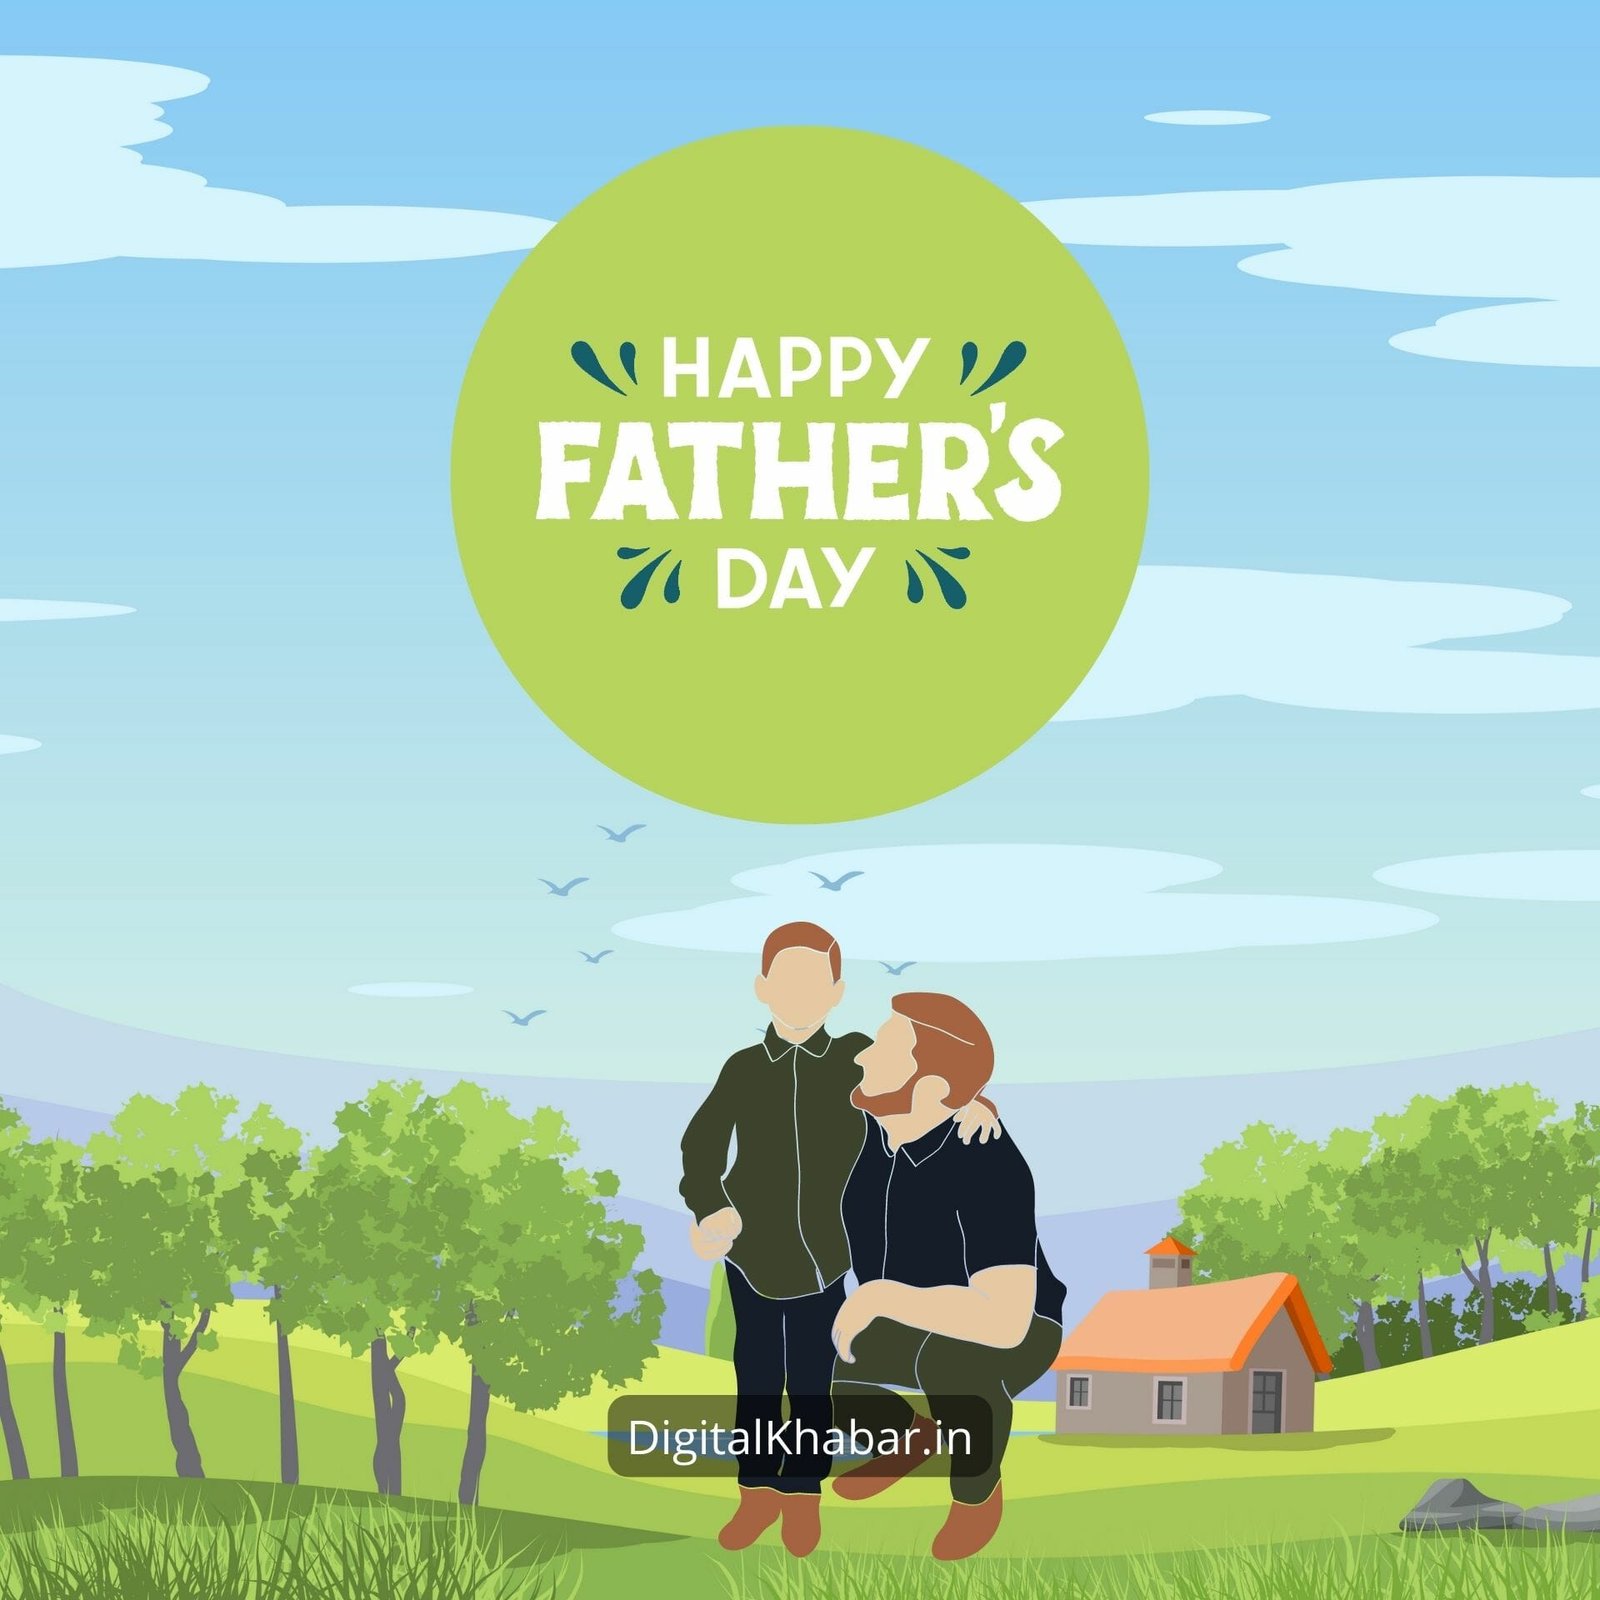 father’s day images and quotes download